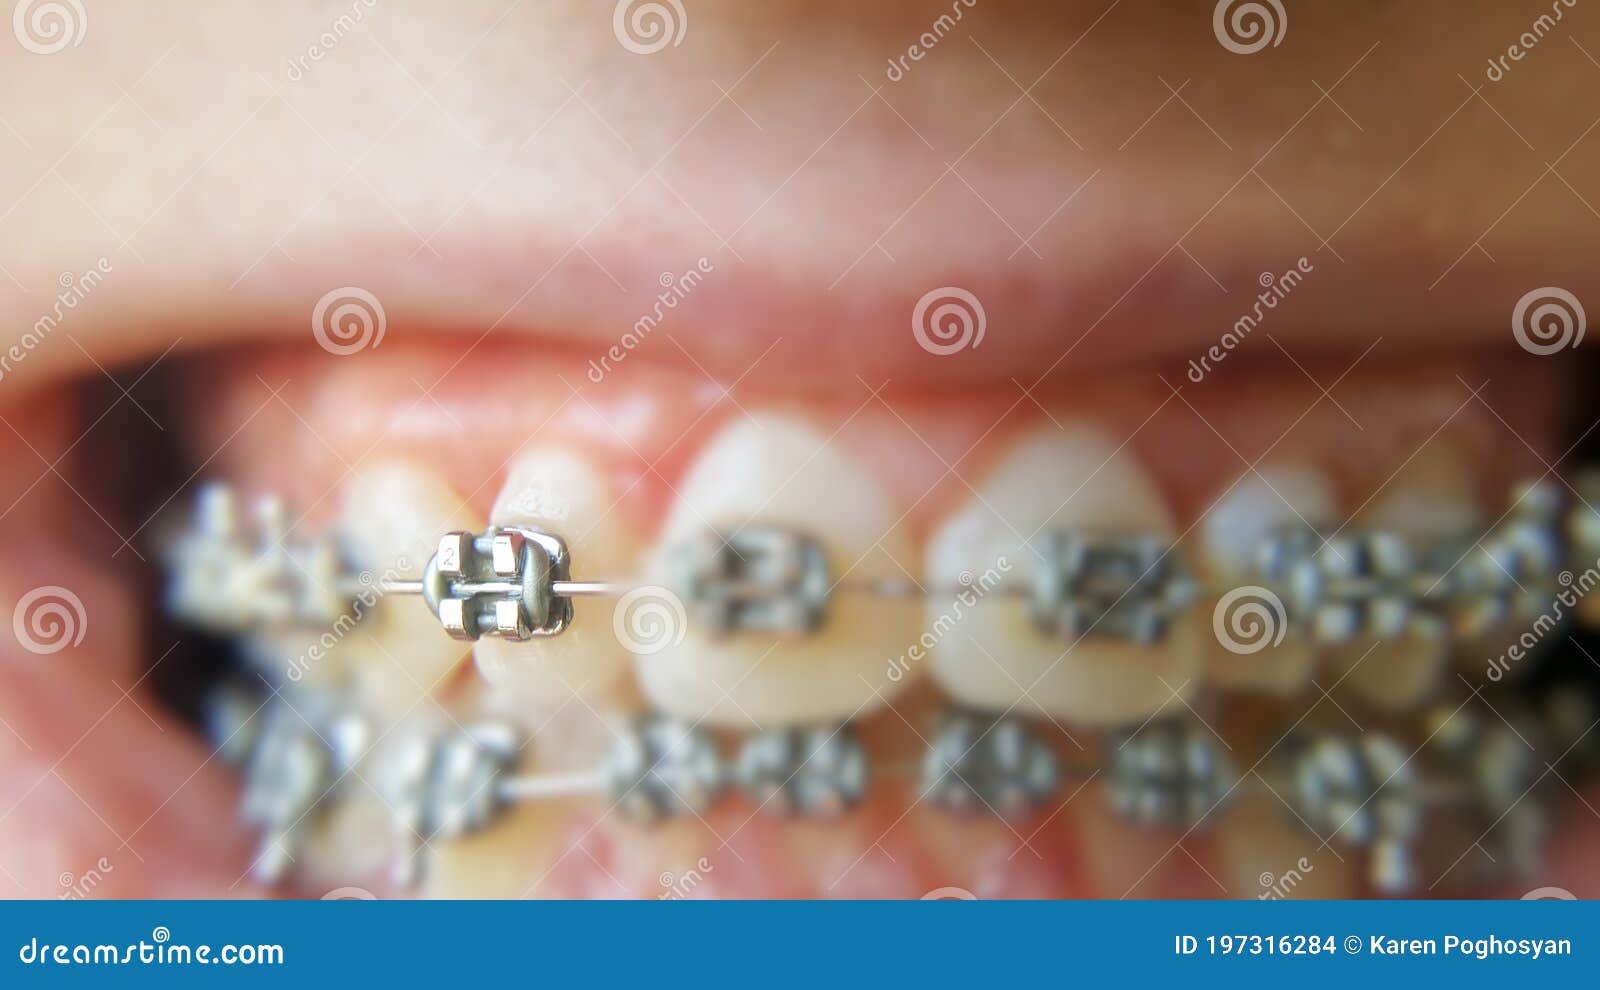 teeth with braces or braces in an open human mouth. selective focus on one bracket. dental care. straightened teeth